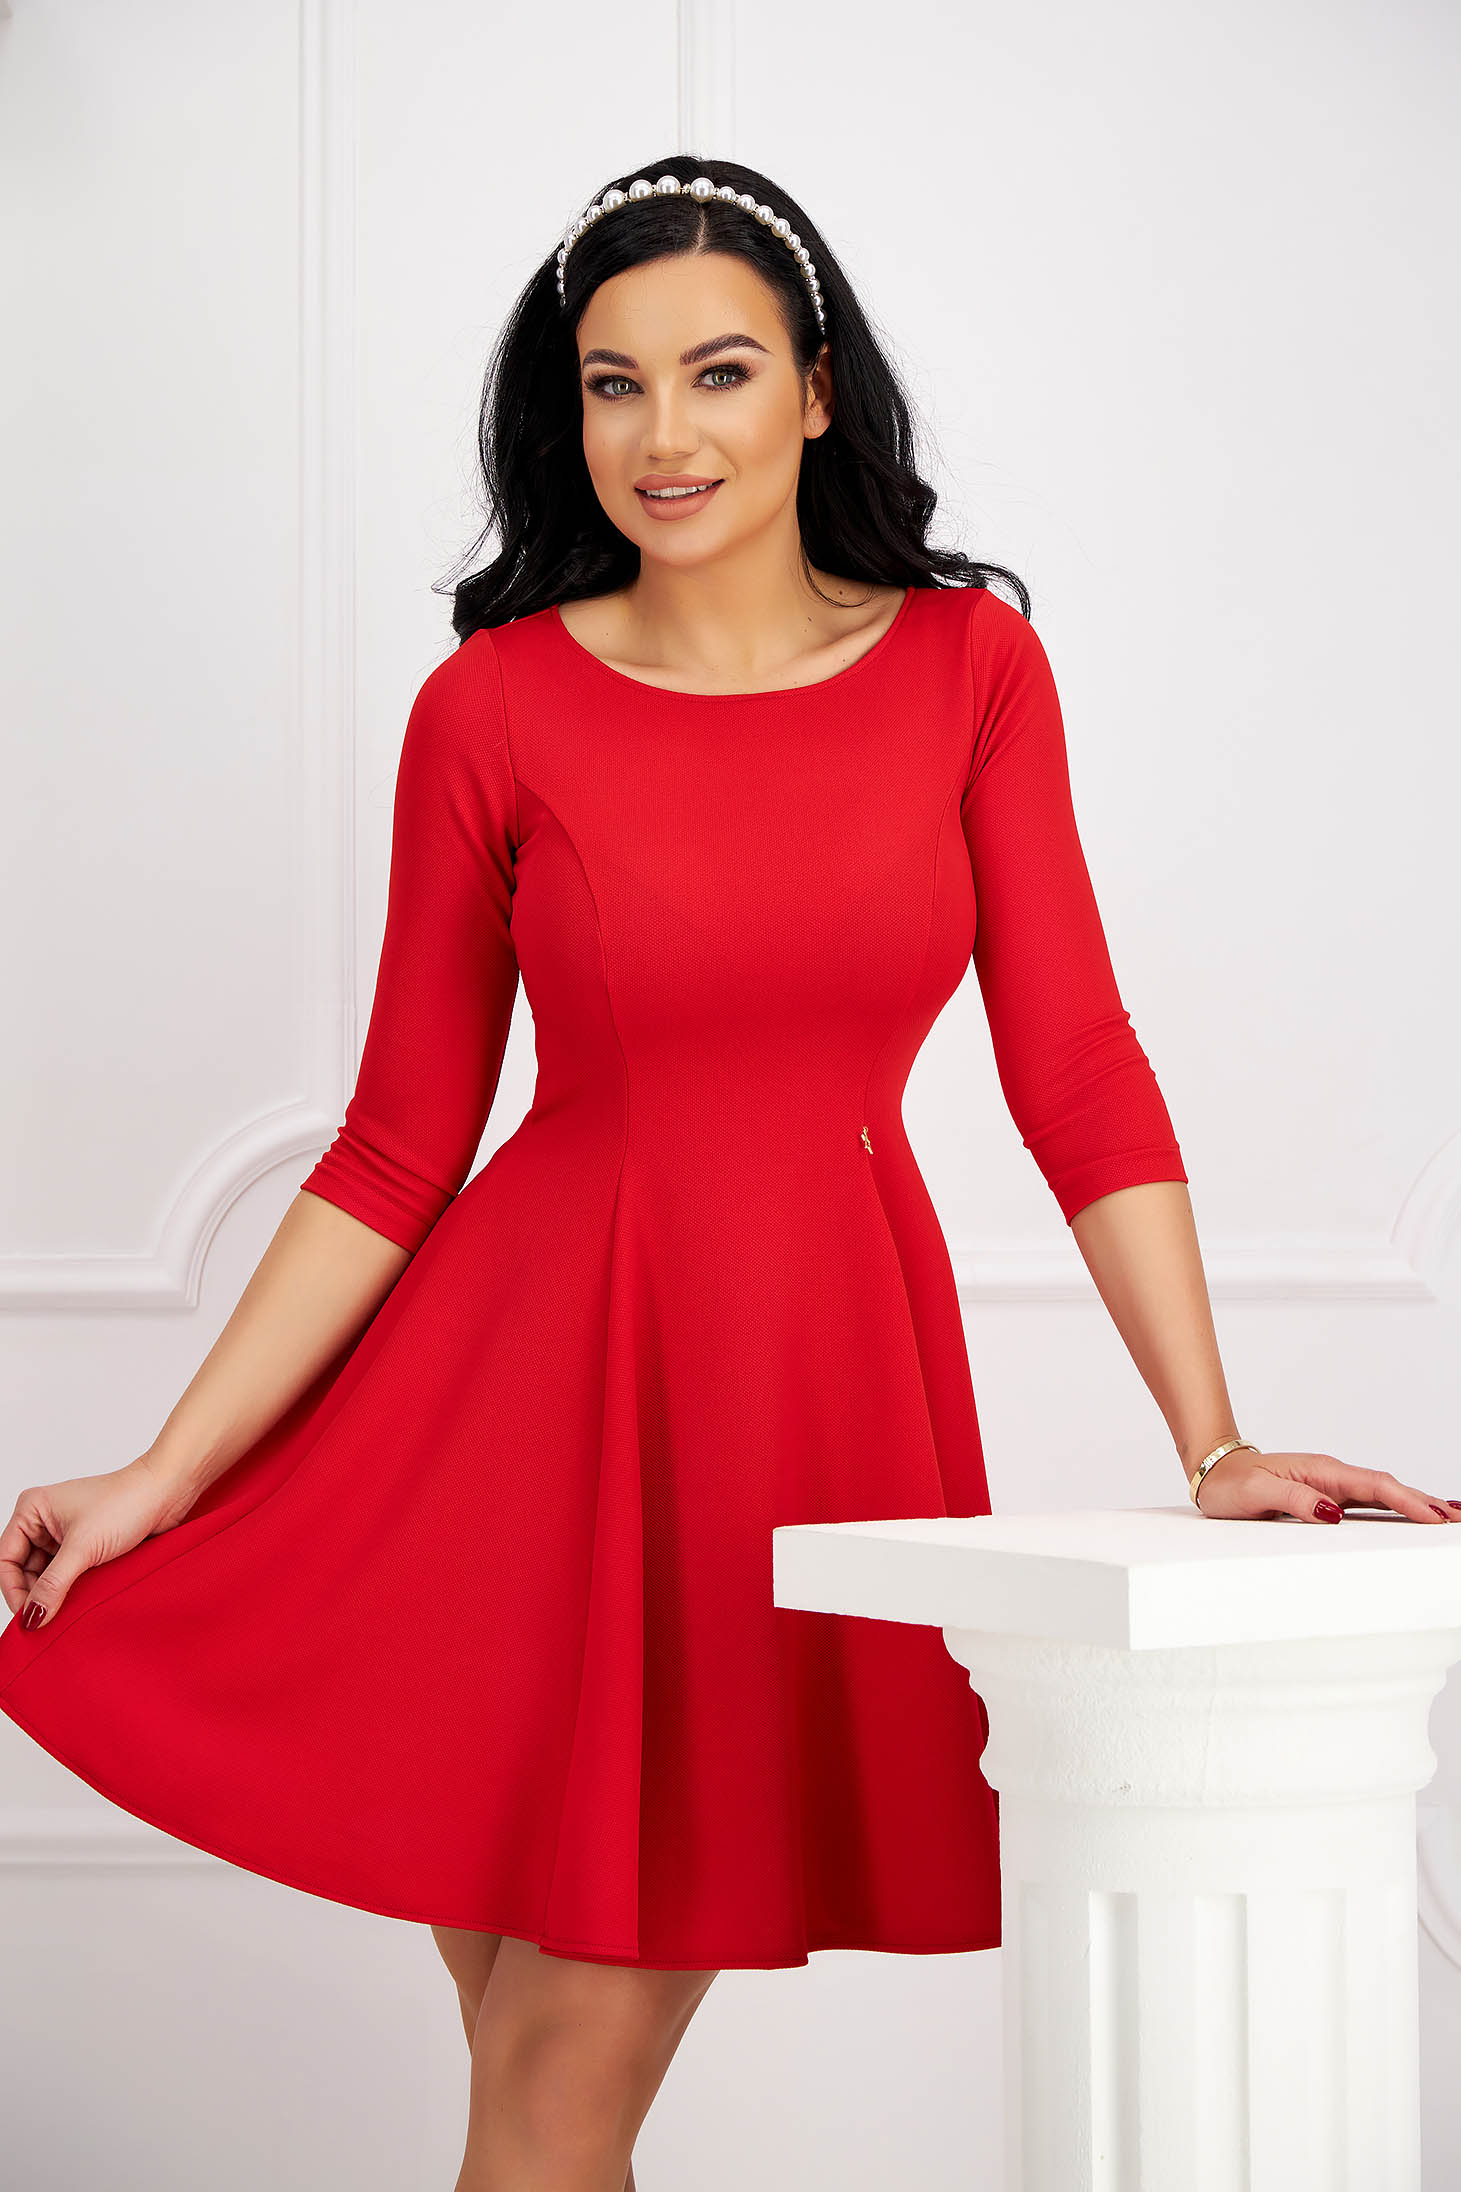 Red Crepe Short A-Line Dress with Round Neckline - StarShinerS 6 - StarShinerS.com